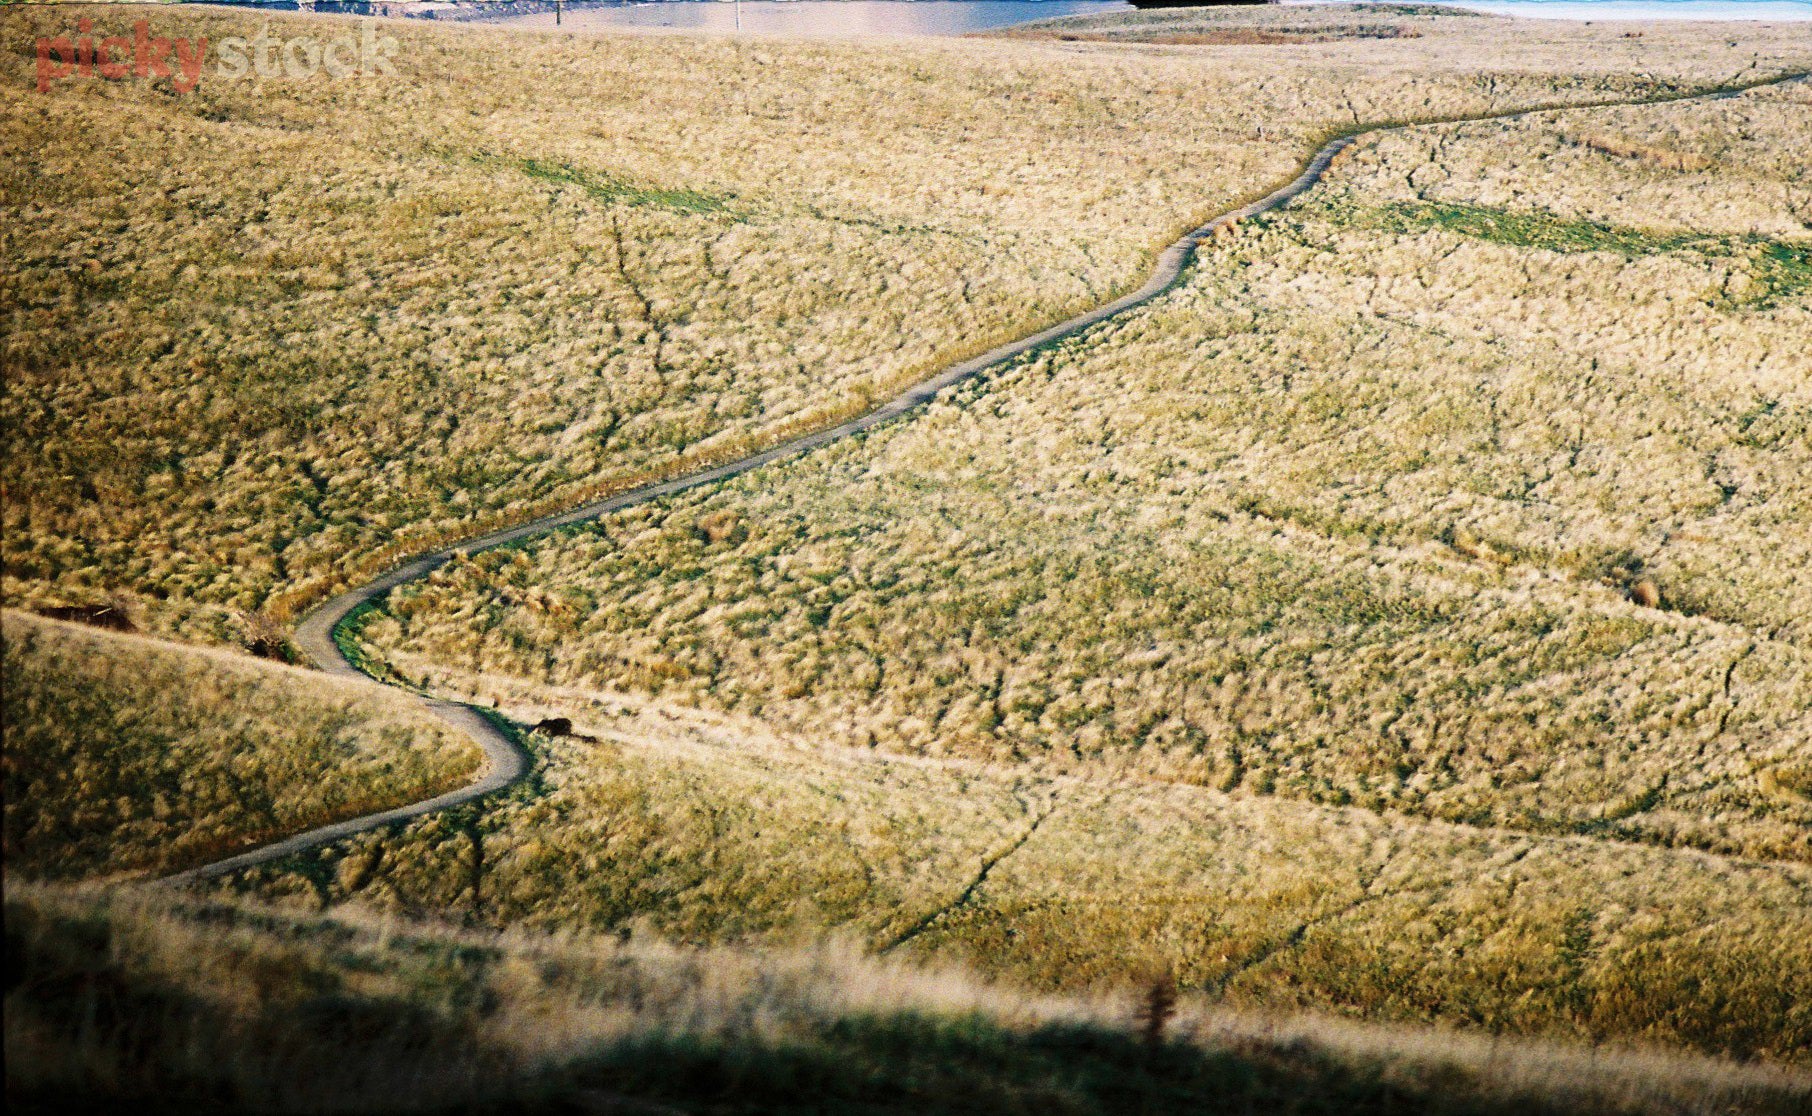 A winding road weaves away through the tussock-style planting out in rural New Zealand. 